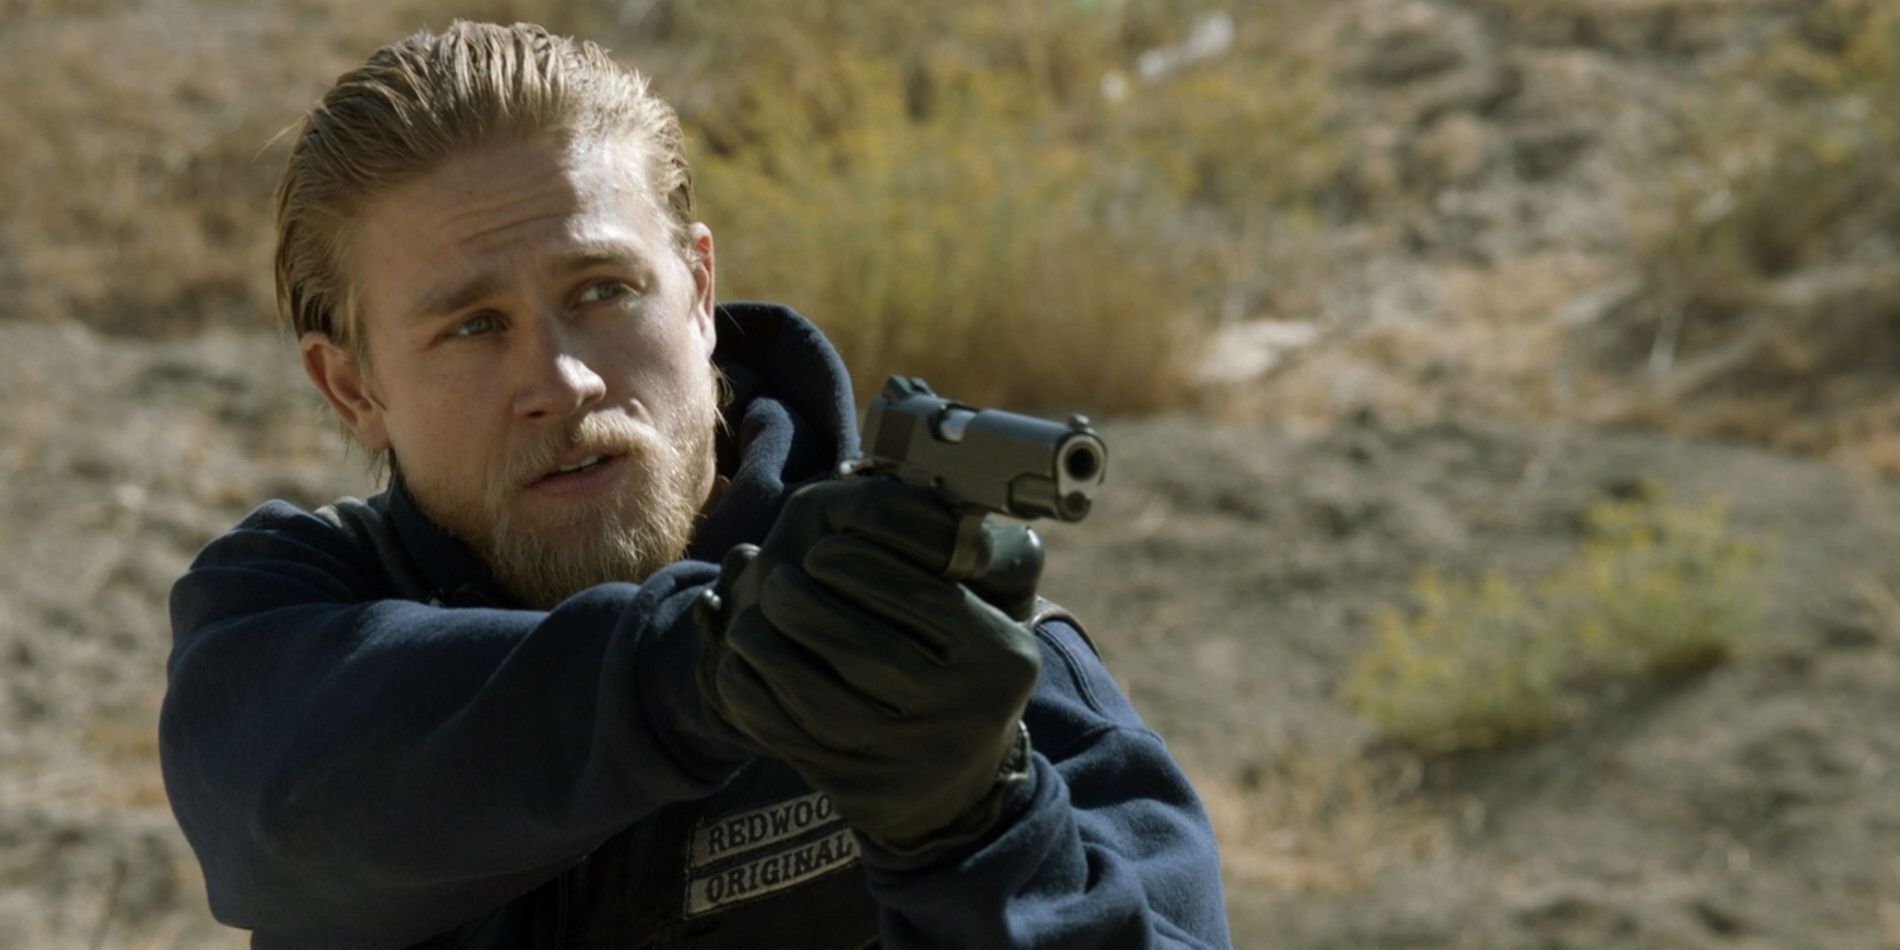 Jax aiming a gun in Sons of Anarchy